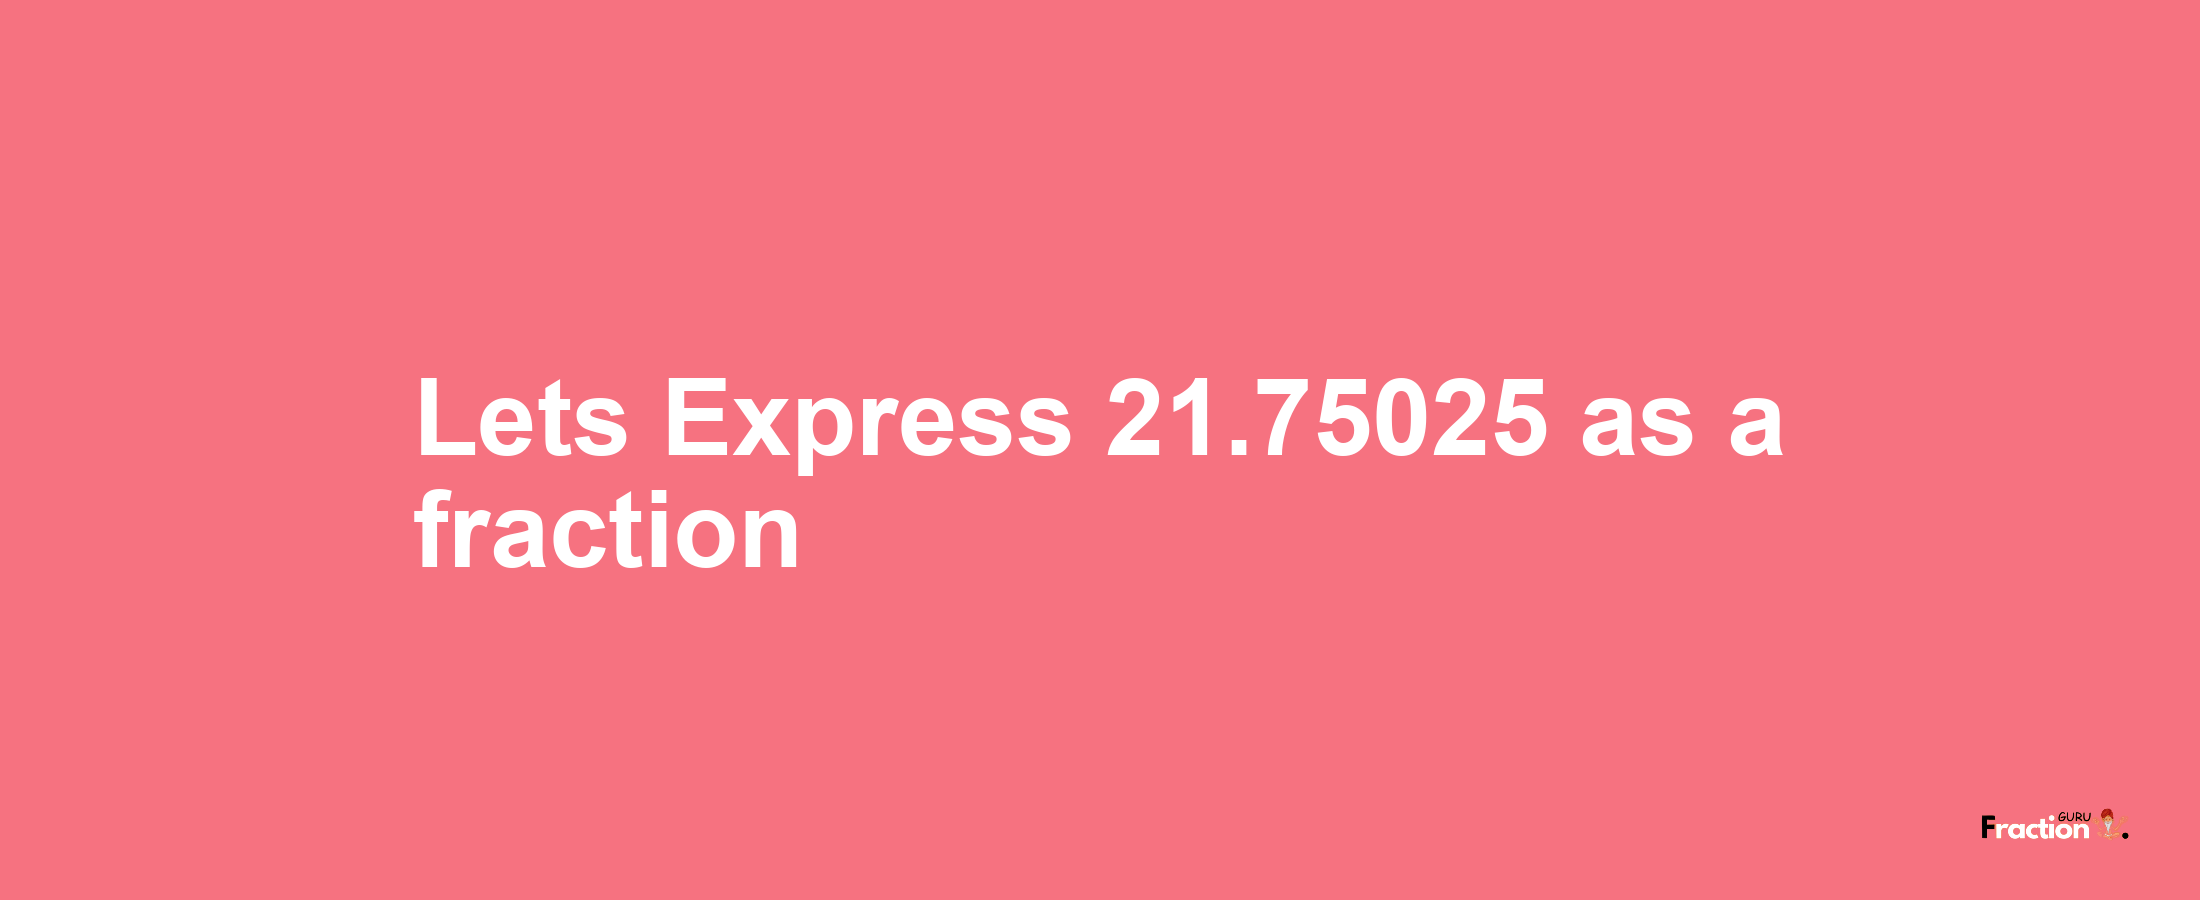 Lets Express 21.75025 as afraction